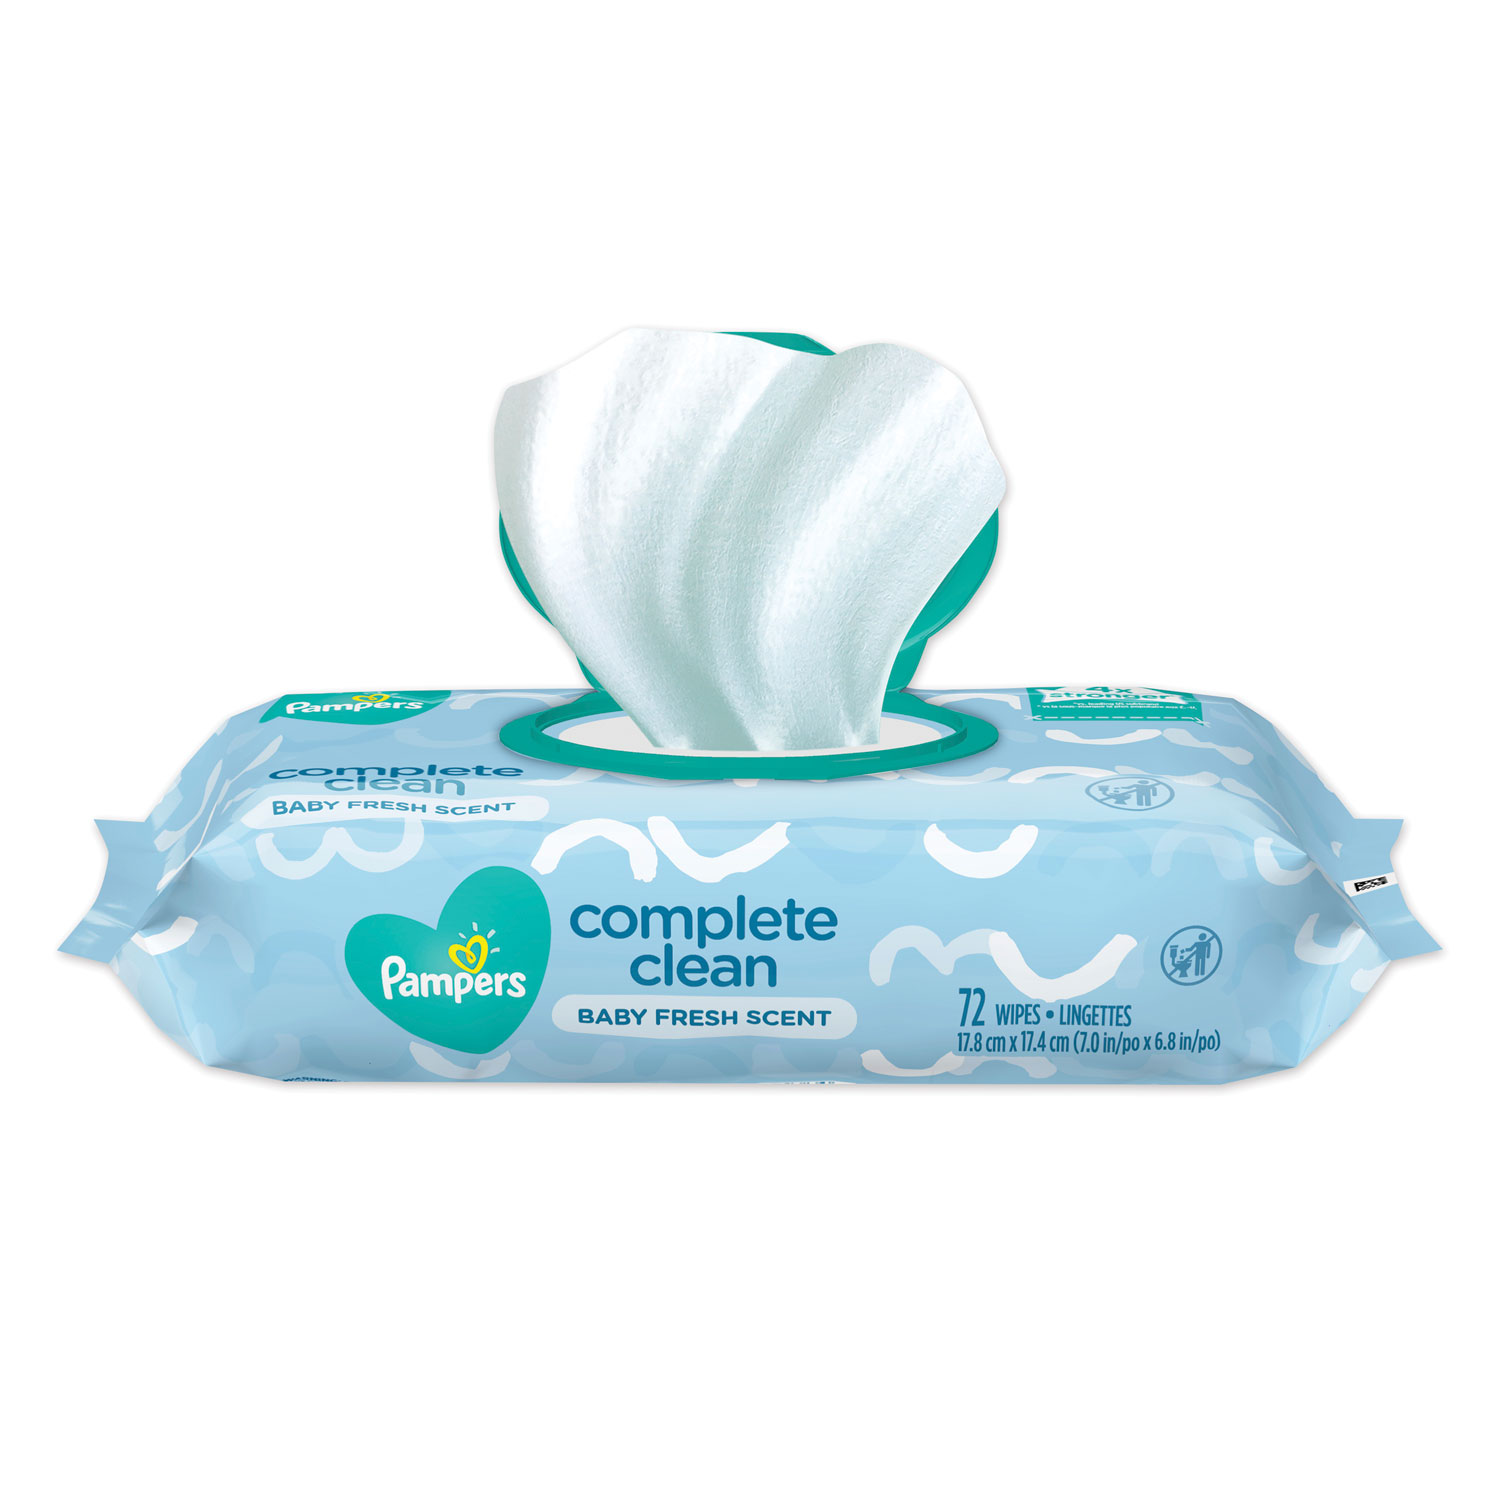  Pampers 75536 Complete Clean Baby Wipes, 1-Ply, Baby Fresh, 72 Wipes/Pack, 8 Packs/Carton (PGC75536) 